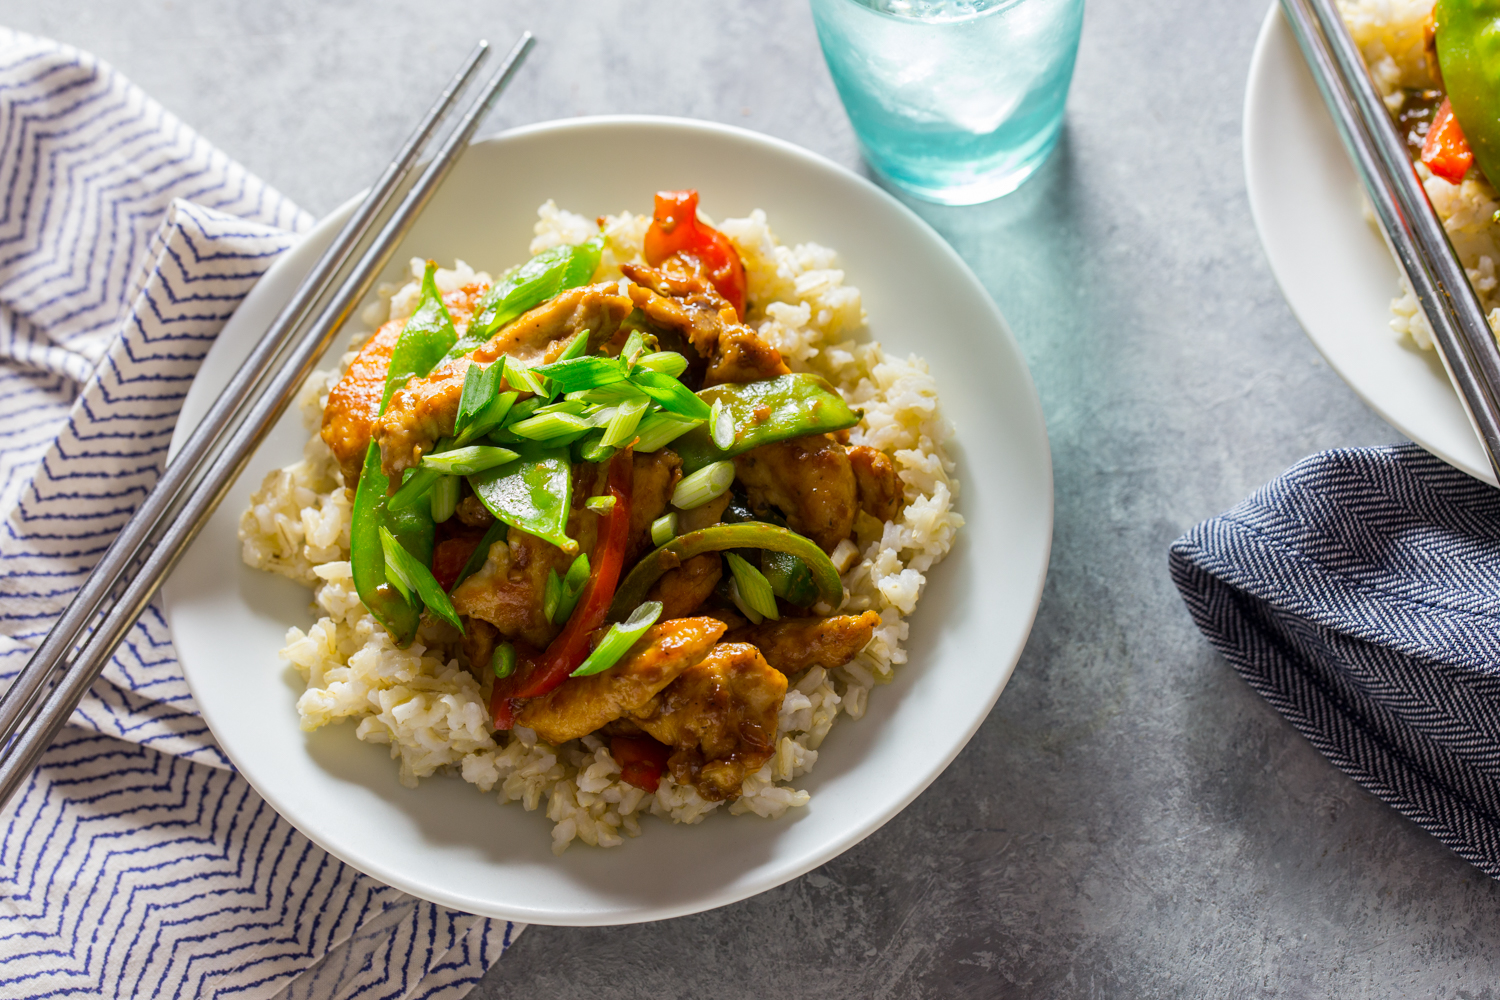 Ginger Chicken Stir Fry is great for a quick and flavor packed weeknight dinner!